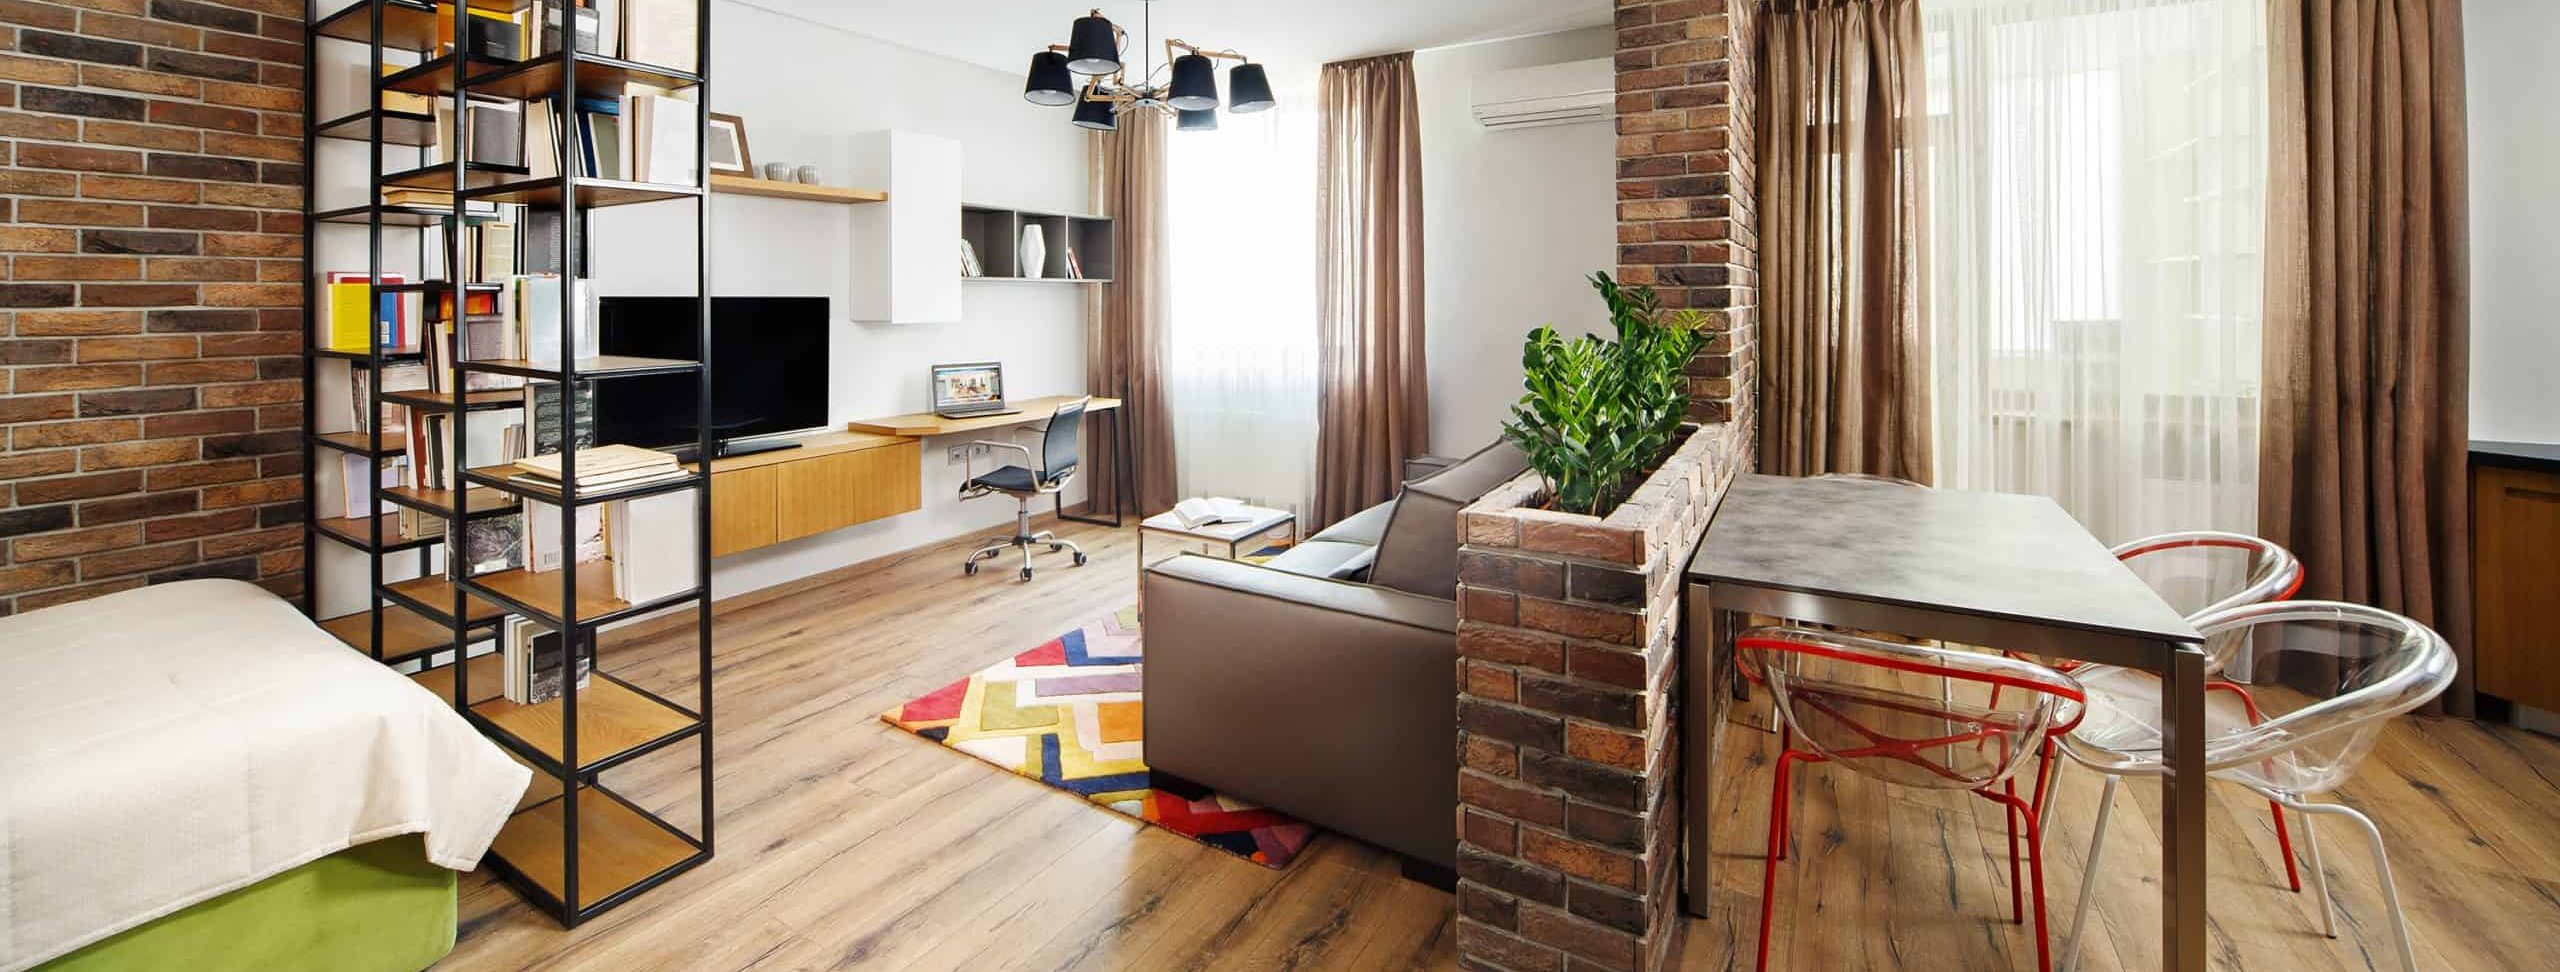 Studio vs. One Bedroom: Pros and Cons of Smaller Apartments